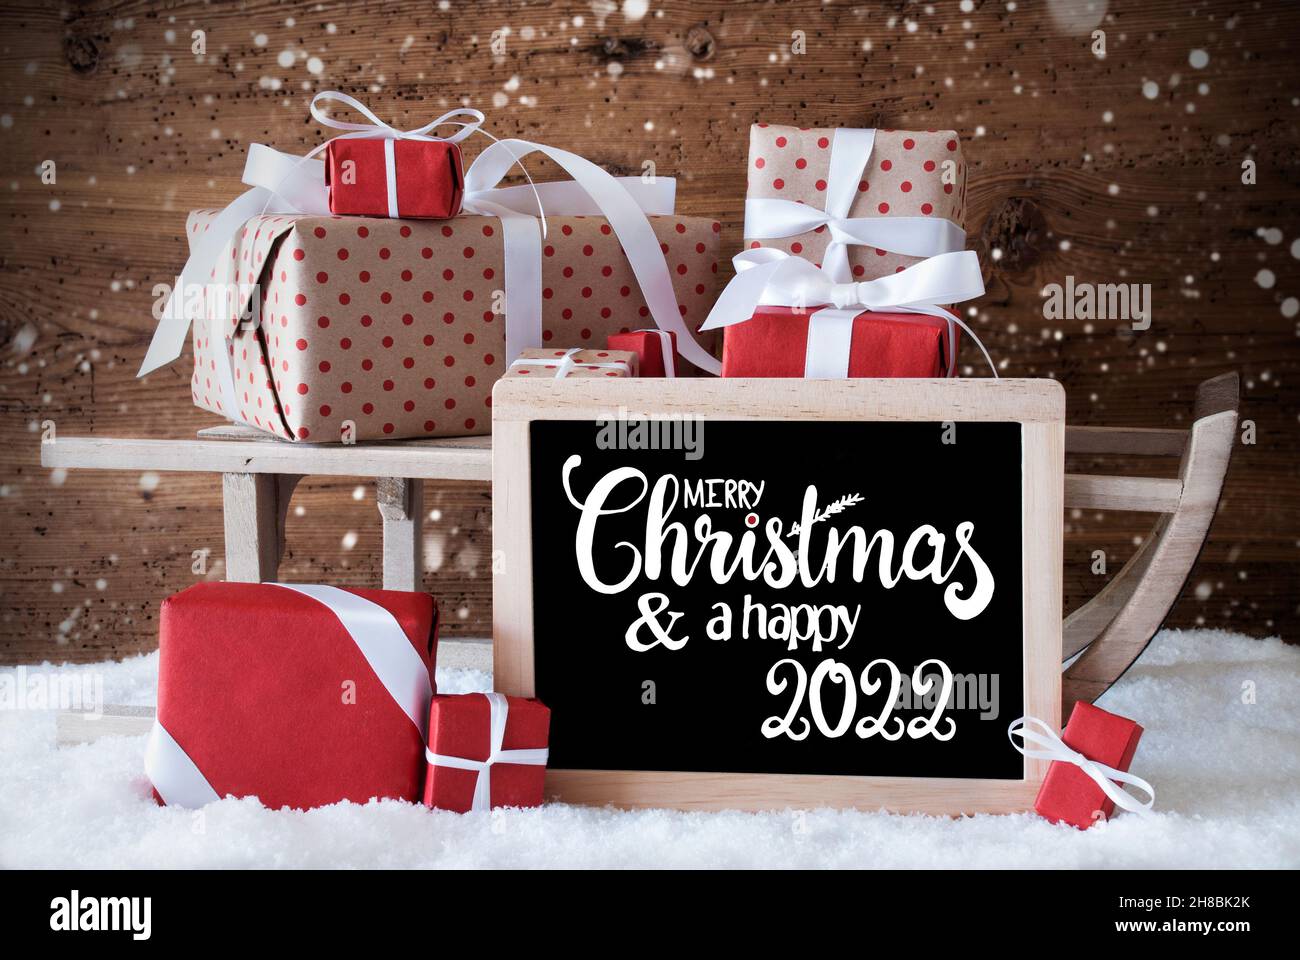 Sleigh, Gift, Snow, Snowflakes, Merry Christmas And A Happy 2022 Stock Photo